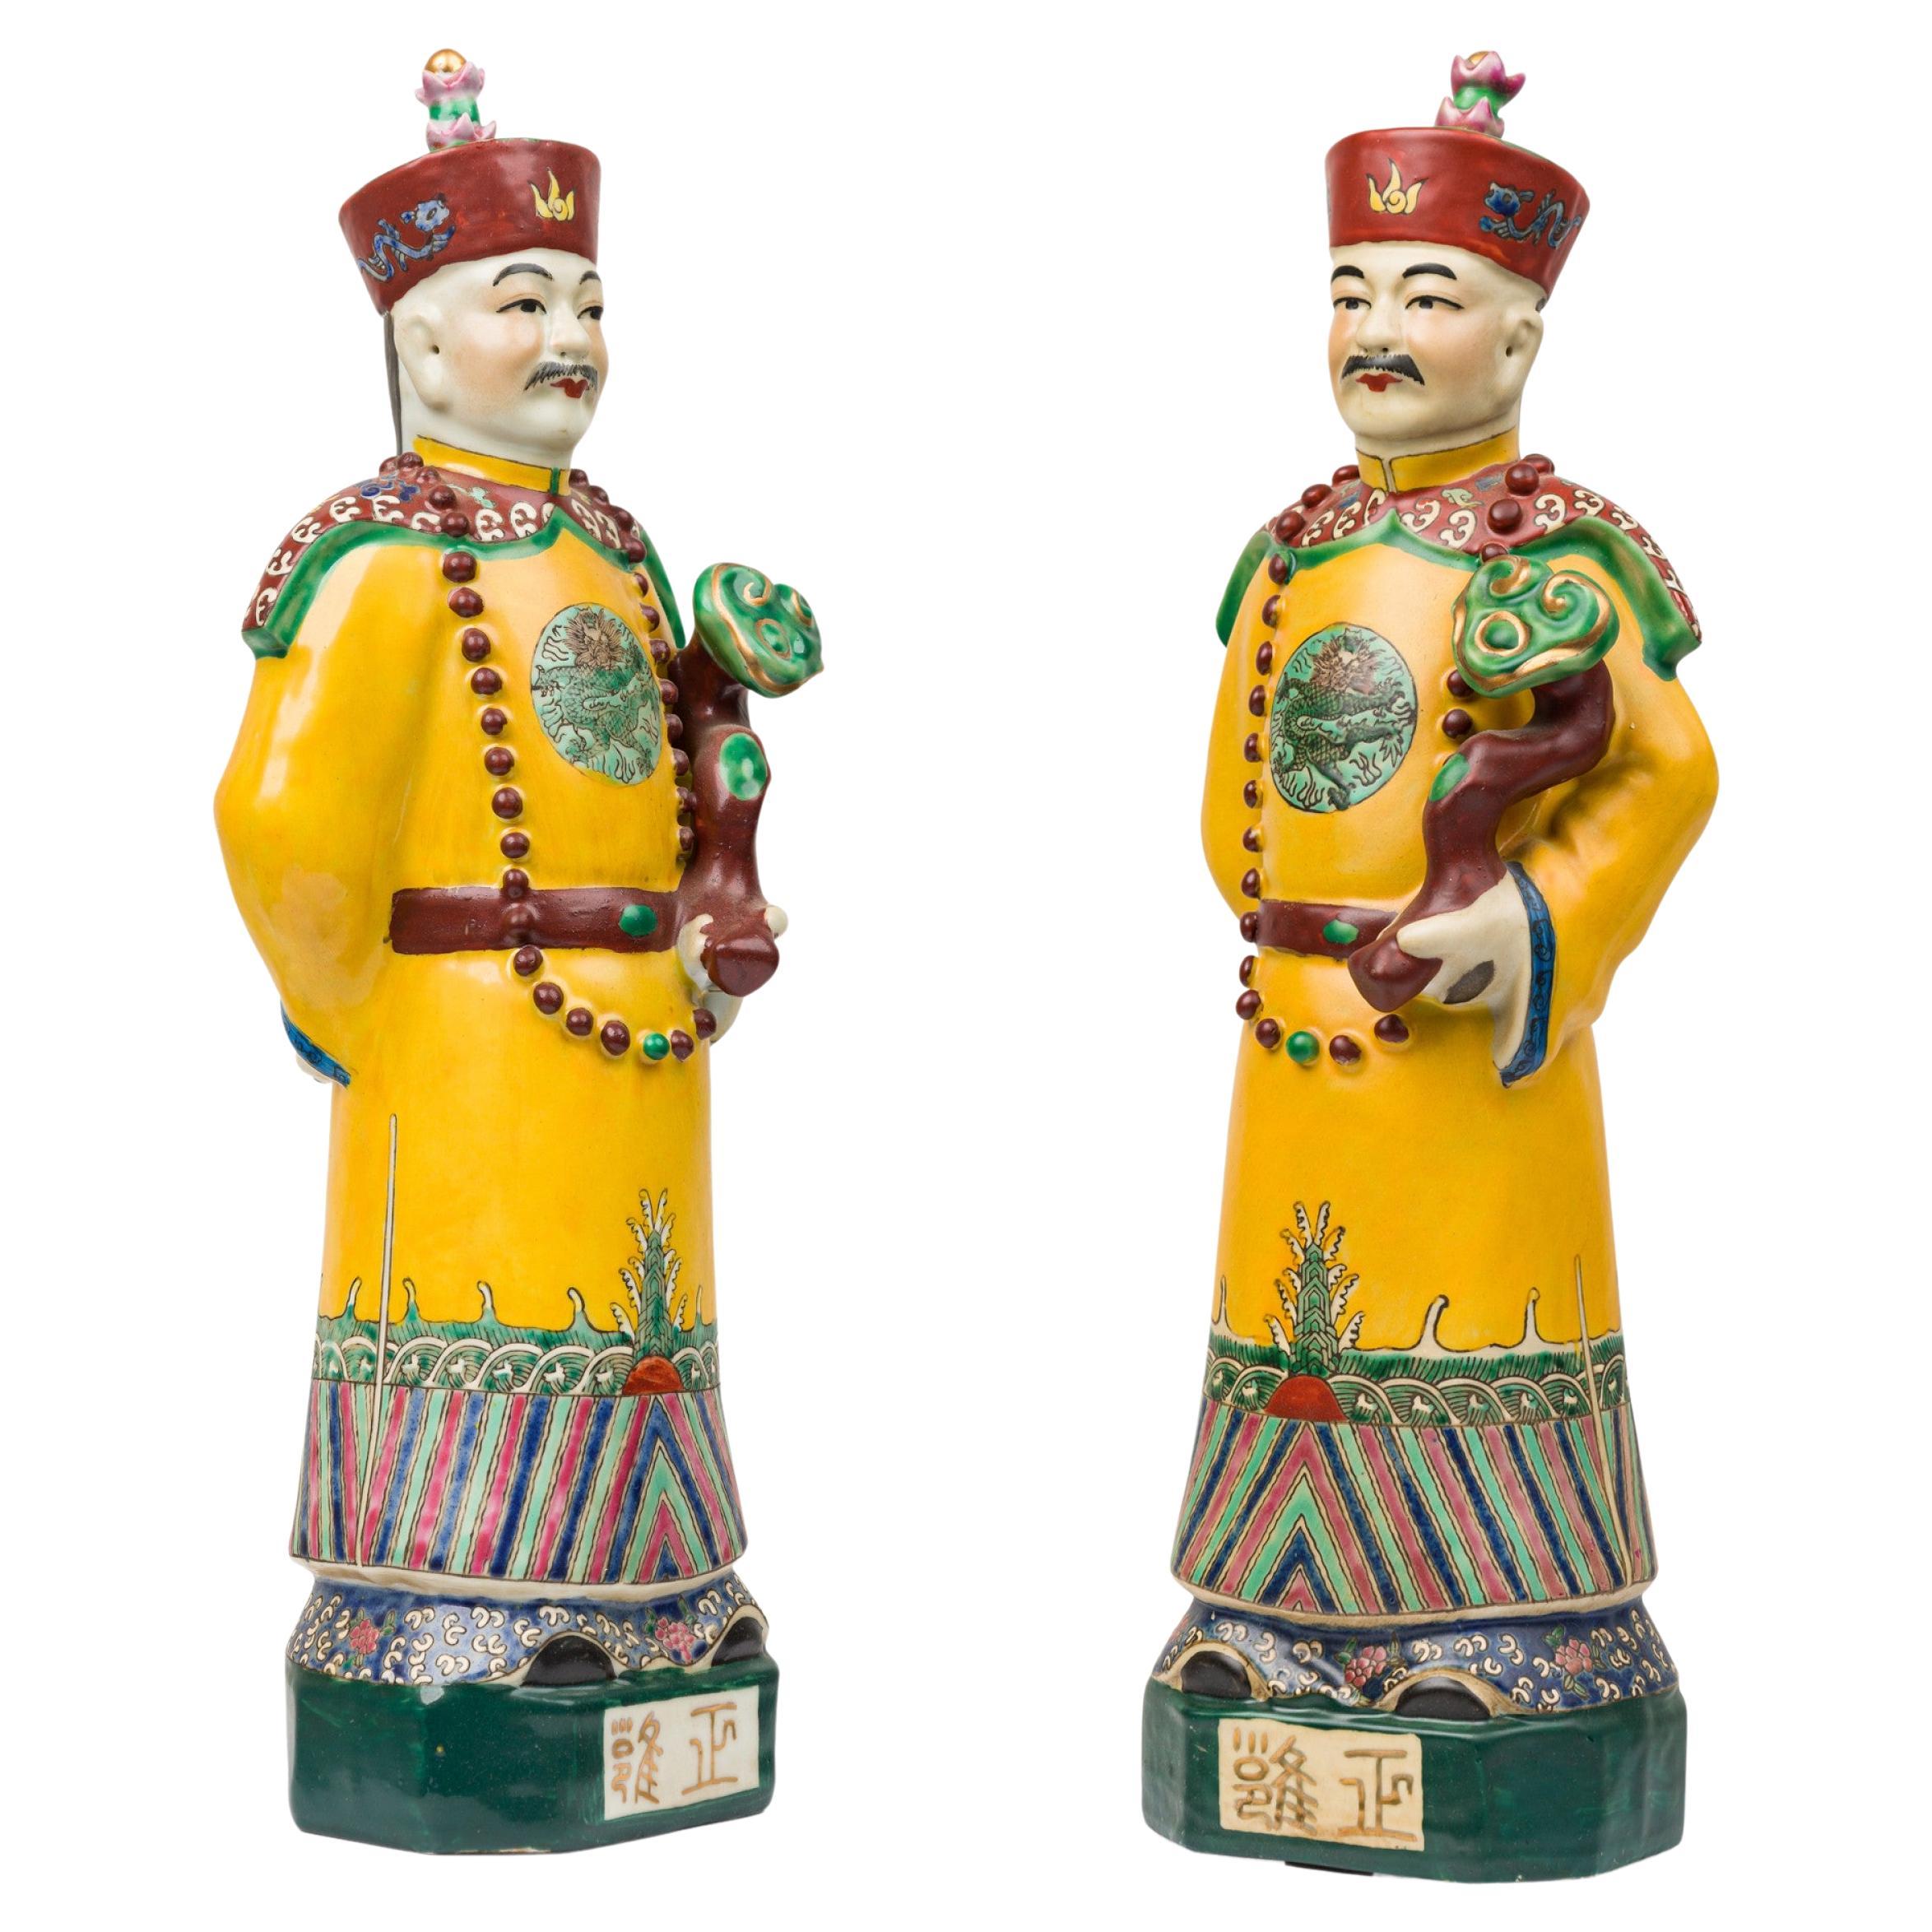 Pair of Chinese Painted Ceramic Figures Depicting a Yellow Robed Emperor For Sale